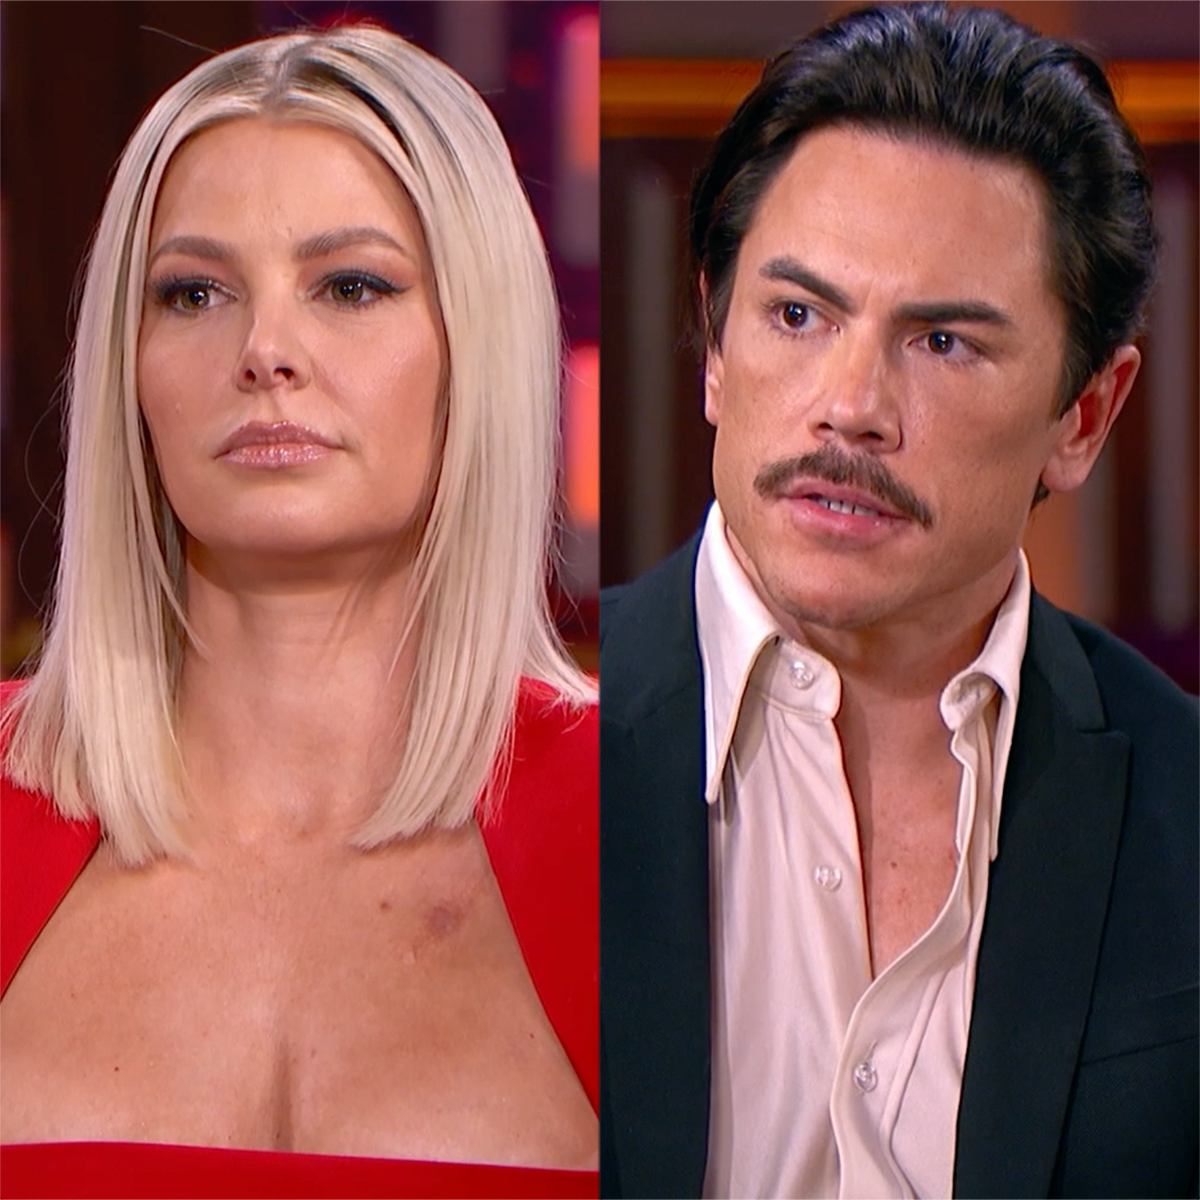 Tom Sandoval Eviscerated for “Low Blow” About Sex With Ariana Madix